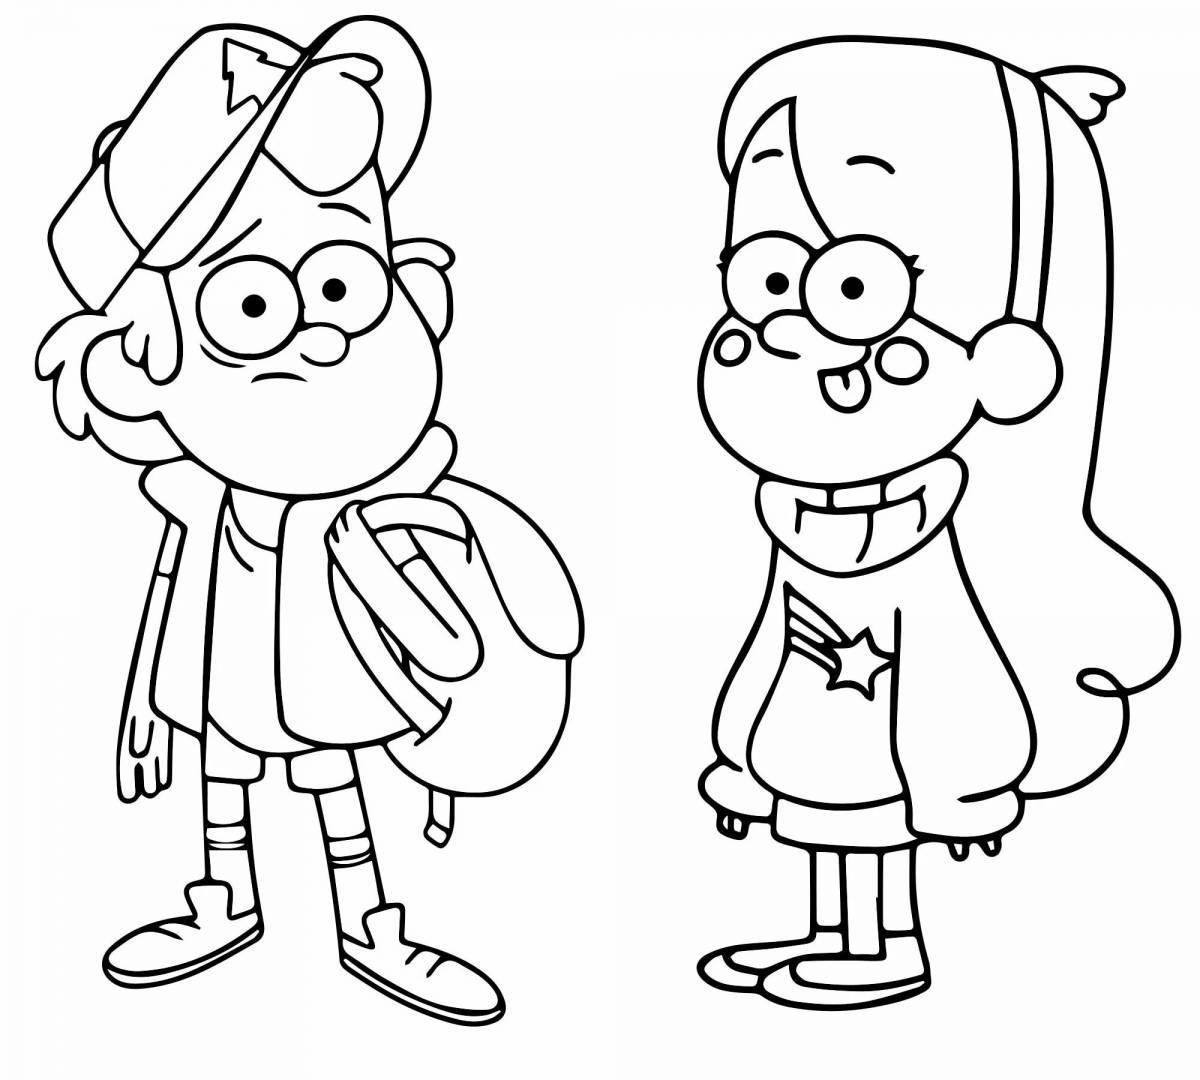 Wendy's attractive gravity falls coloring book